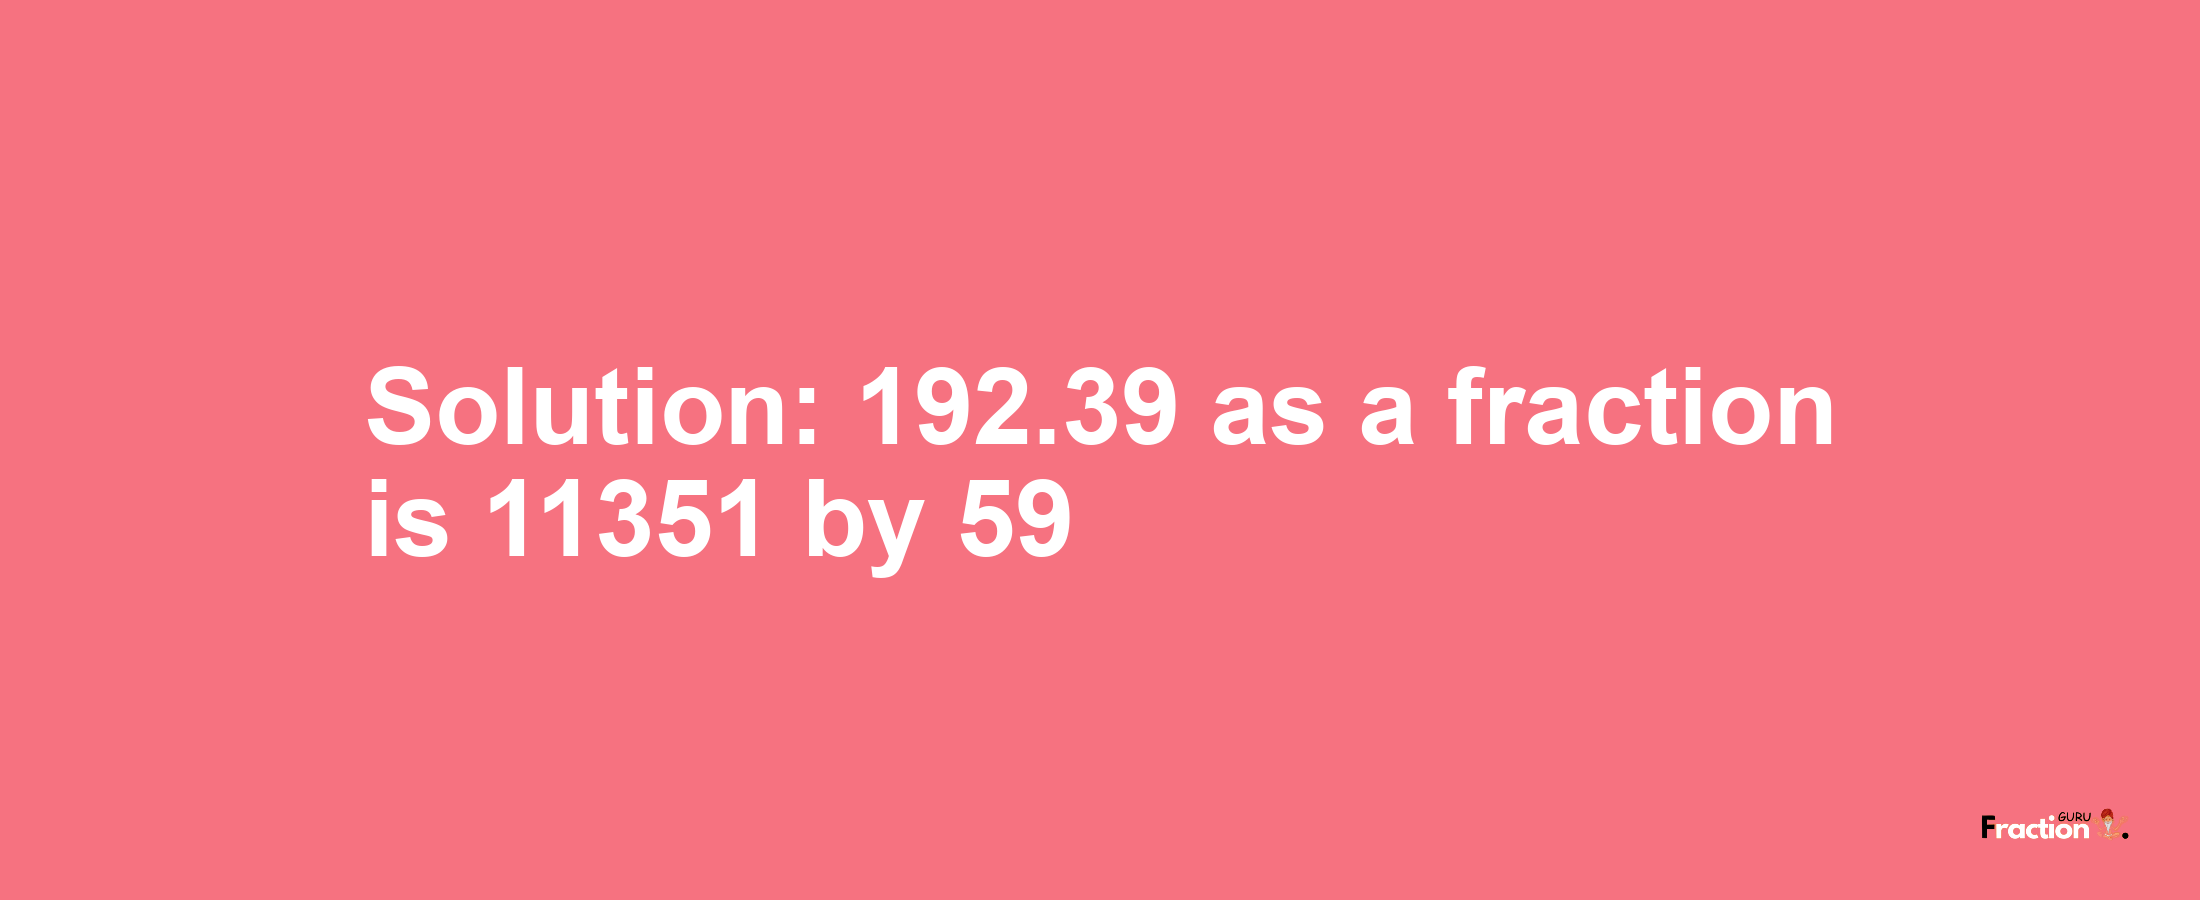 Solution:192.39 as a fraction is 11351/59